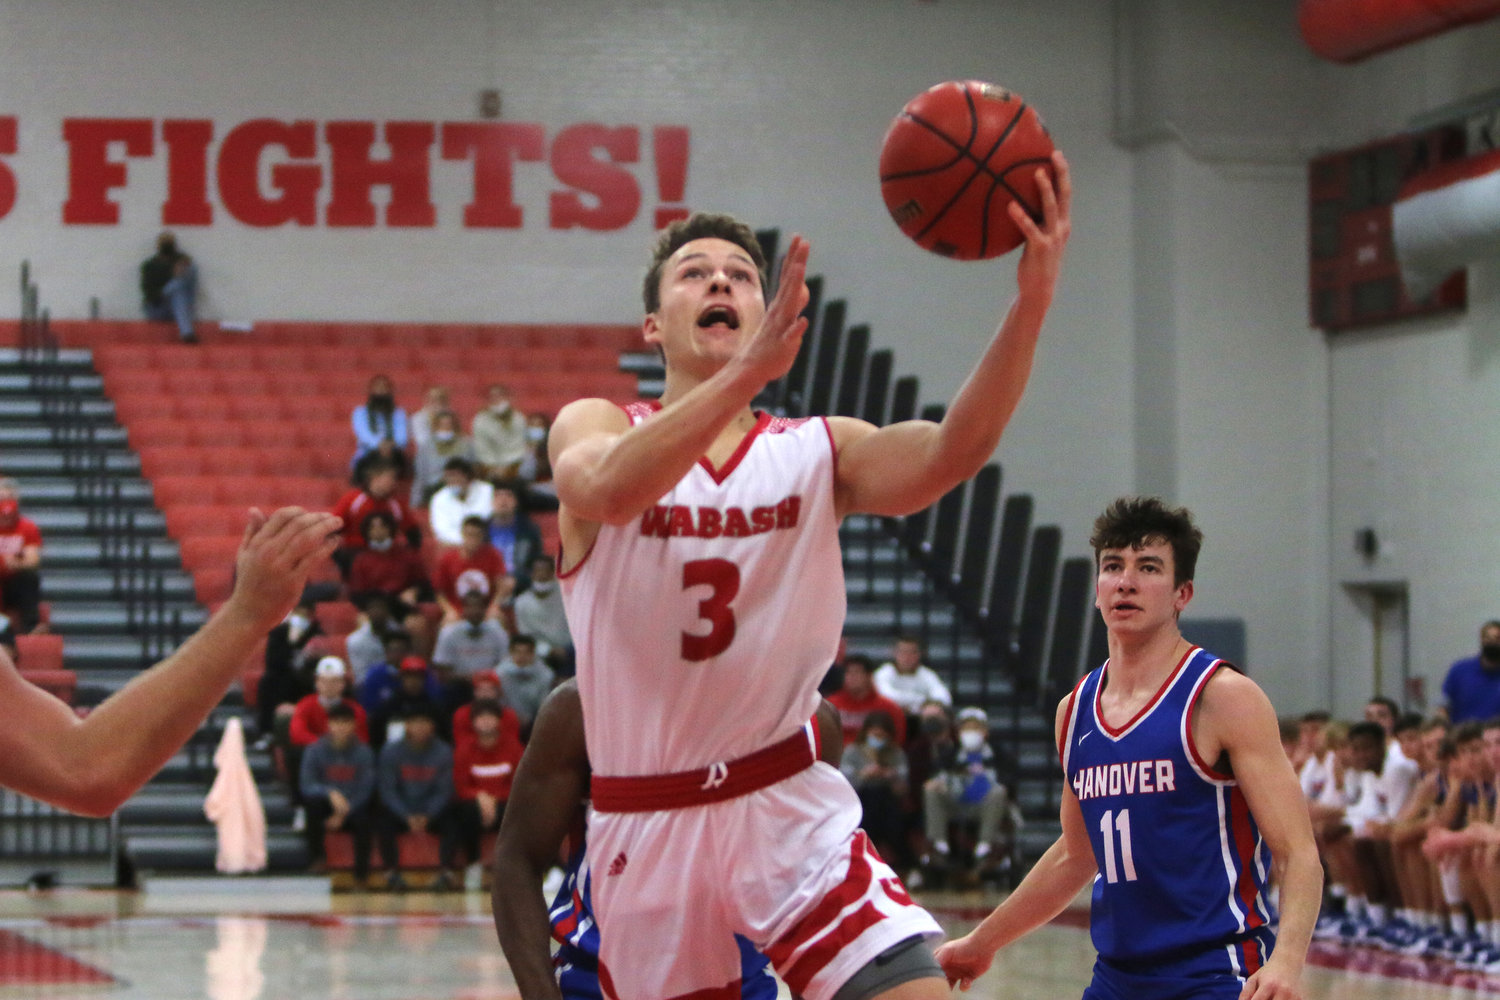 Senior guard Jack Davidson led all scorers with 33 points for Wabash in the 83-81 loss to Hanover Wednesday evening